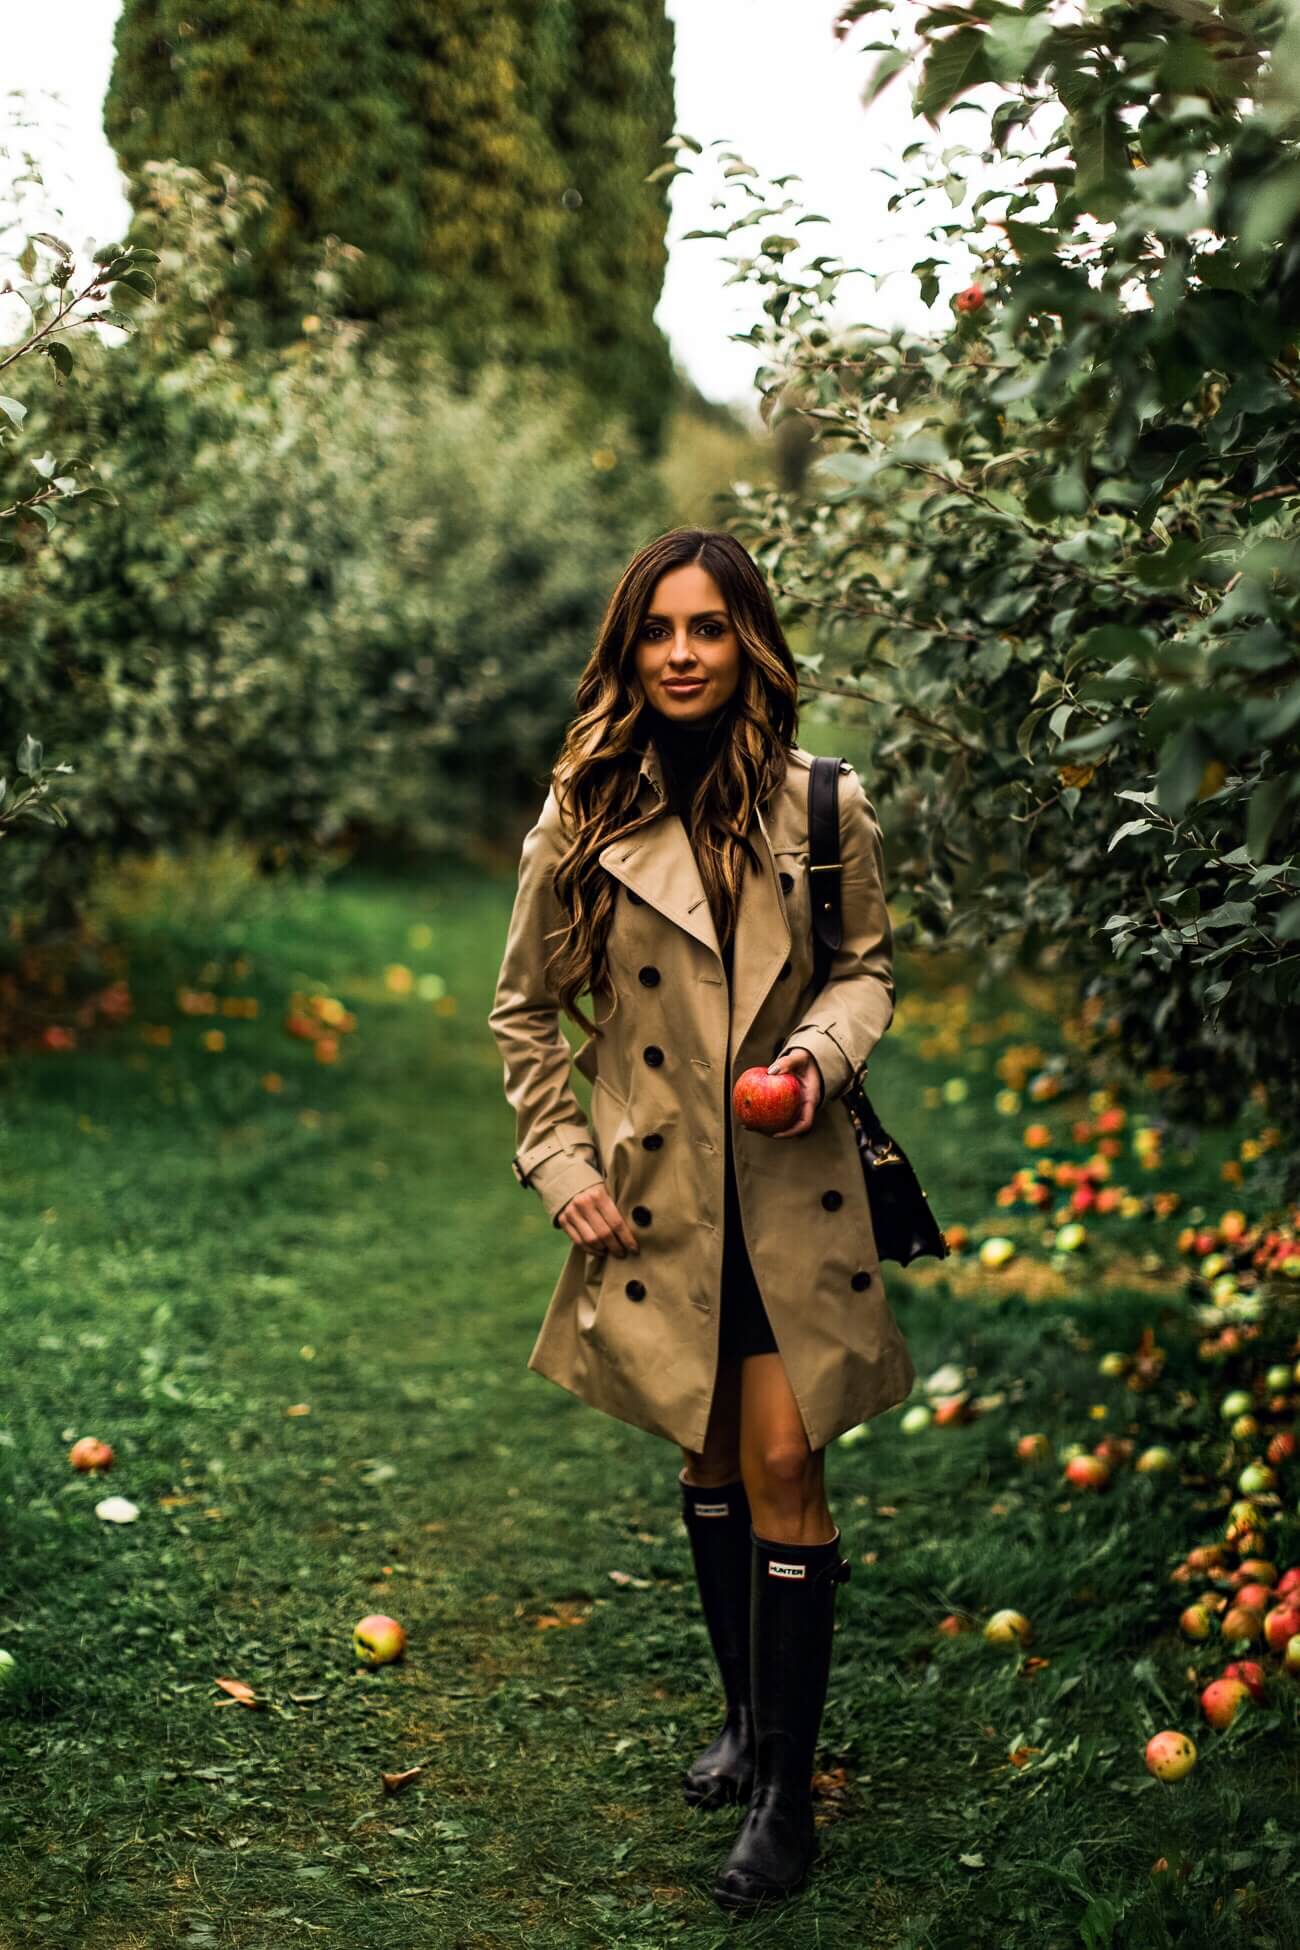 mia mia mine wearing a burberry coat at an apple orchard